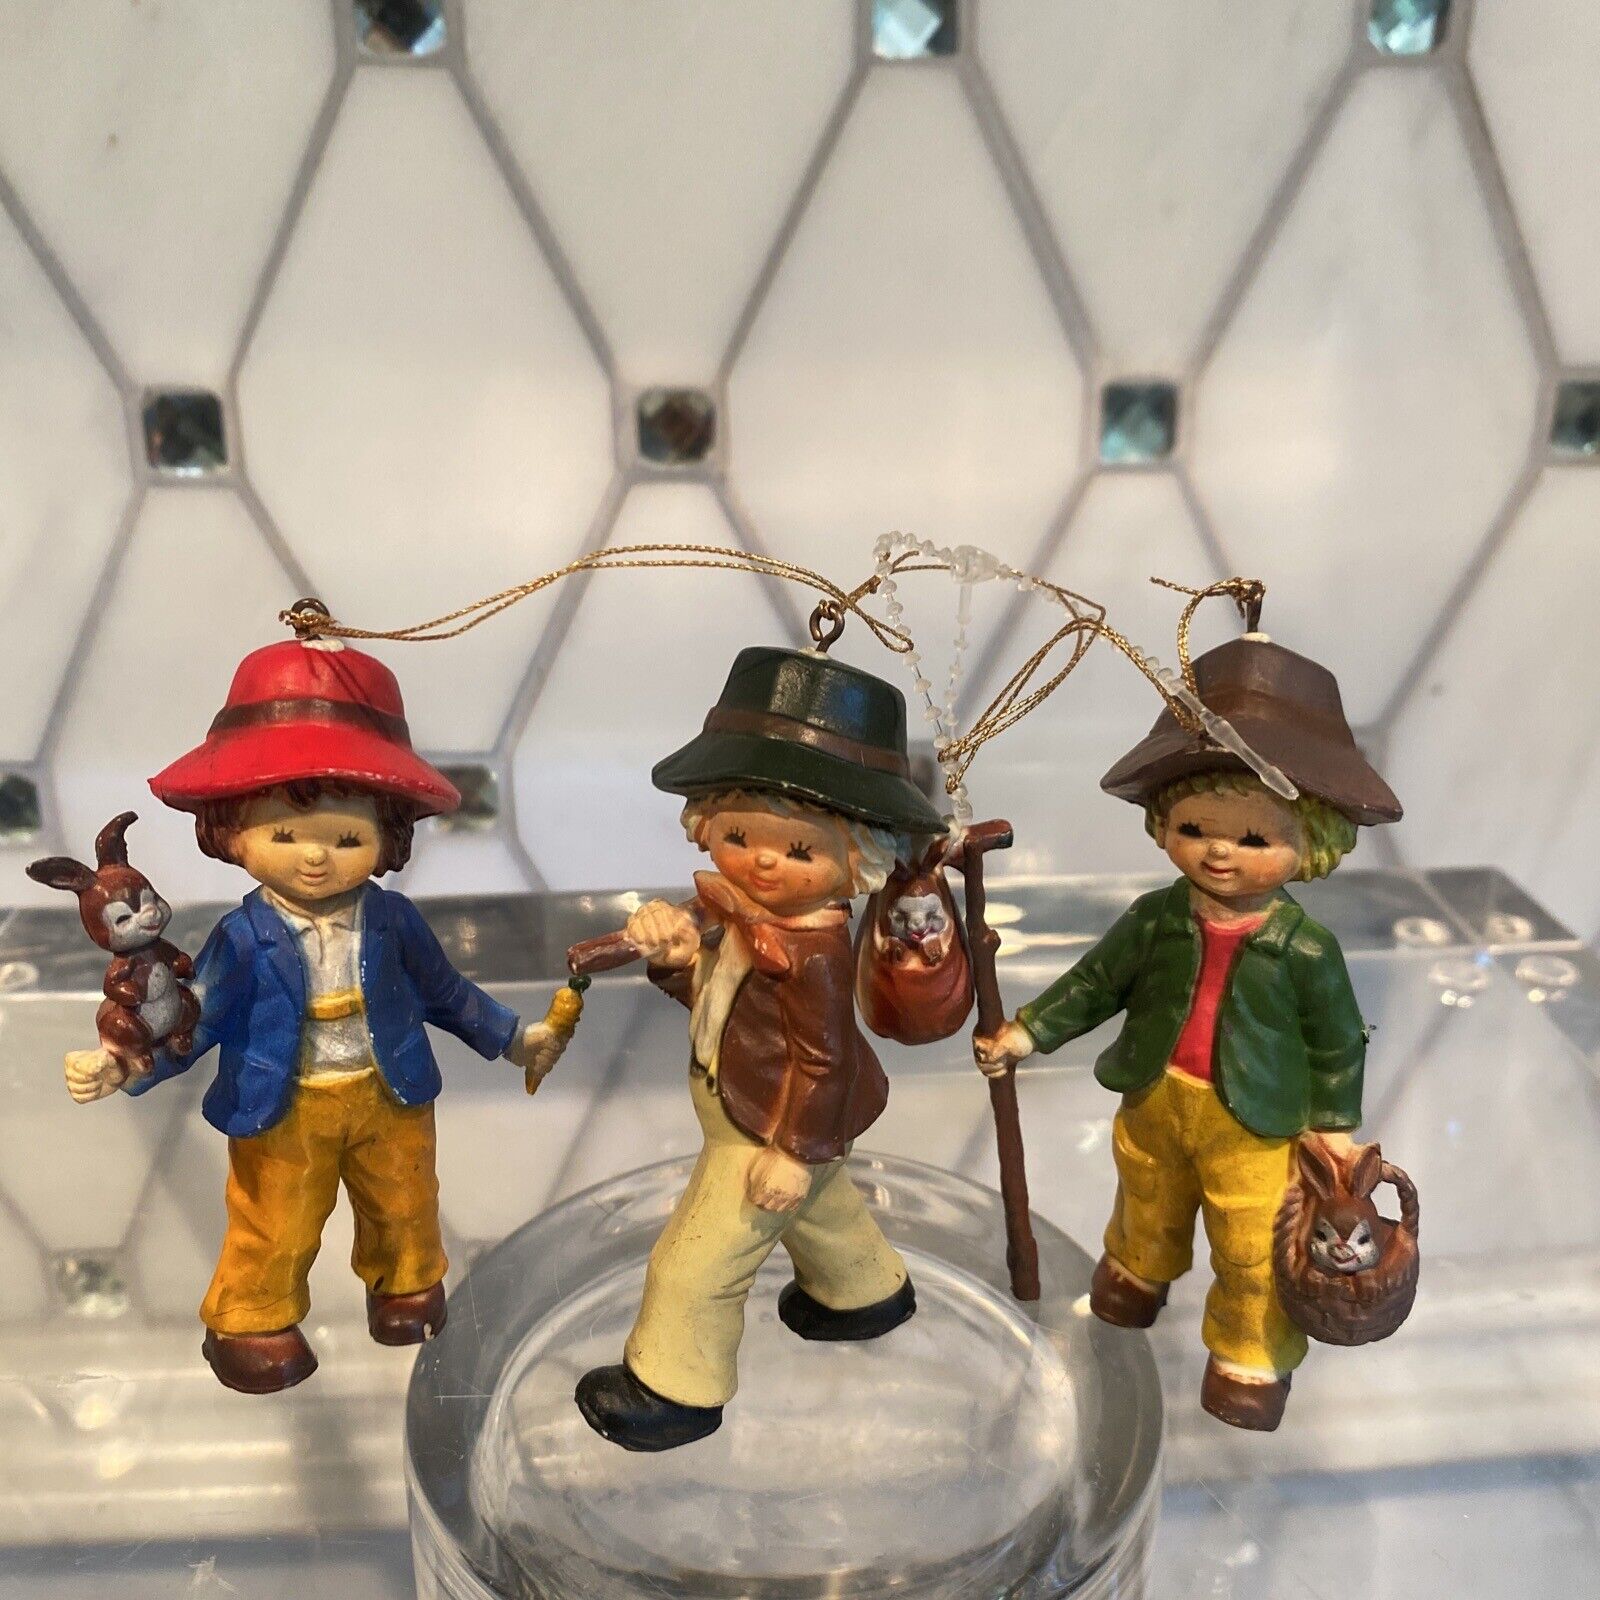 VTG Bradford Christmas Ornaments Lot Of 4, Hard Plastic, Kids Playing In Country